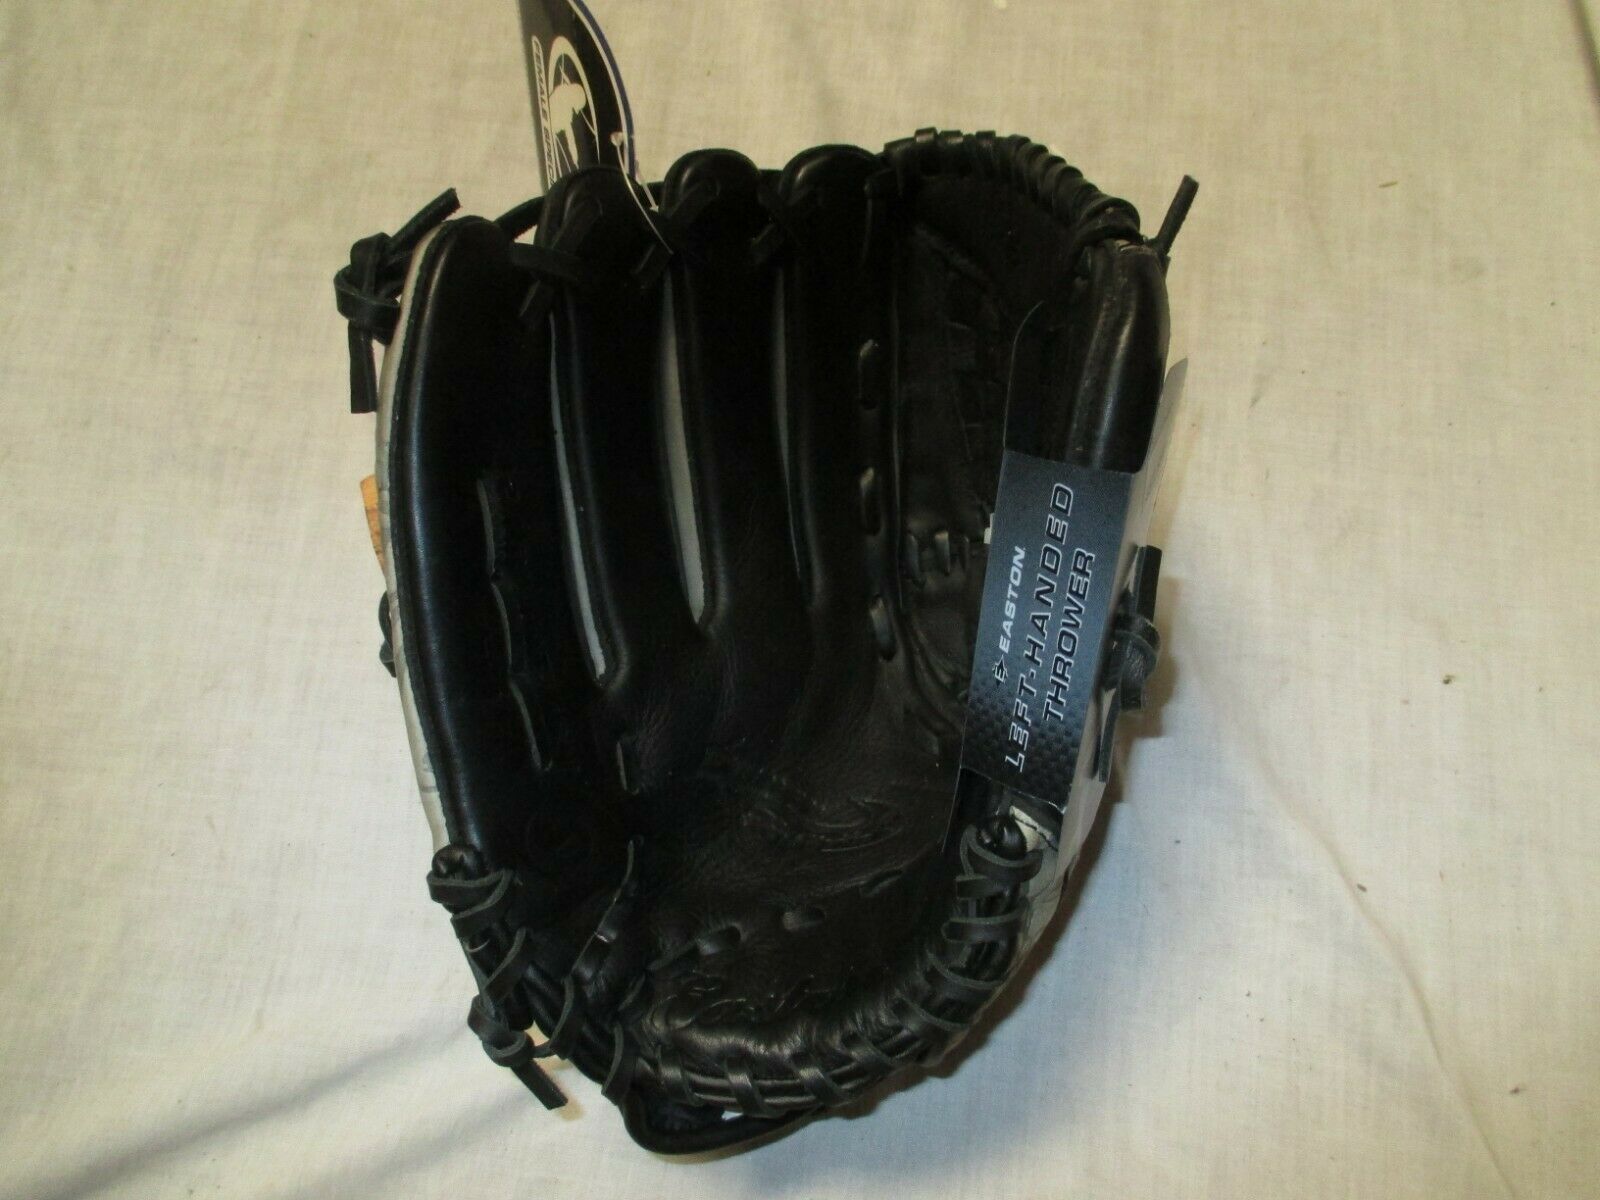 EASTON SYNERGY125FP FASTPITCH SOFTBALL GLOVE LH PLAYER(GOES ON RIGHT HAND)